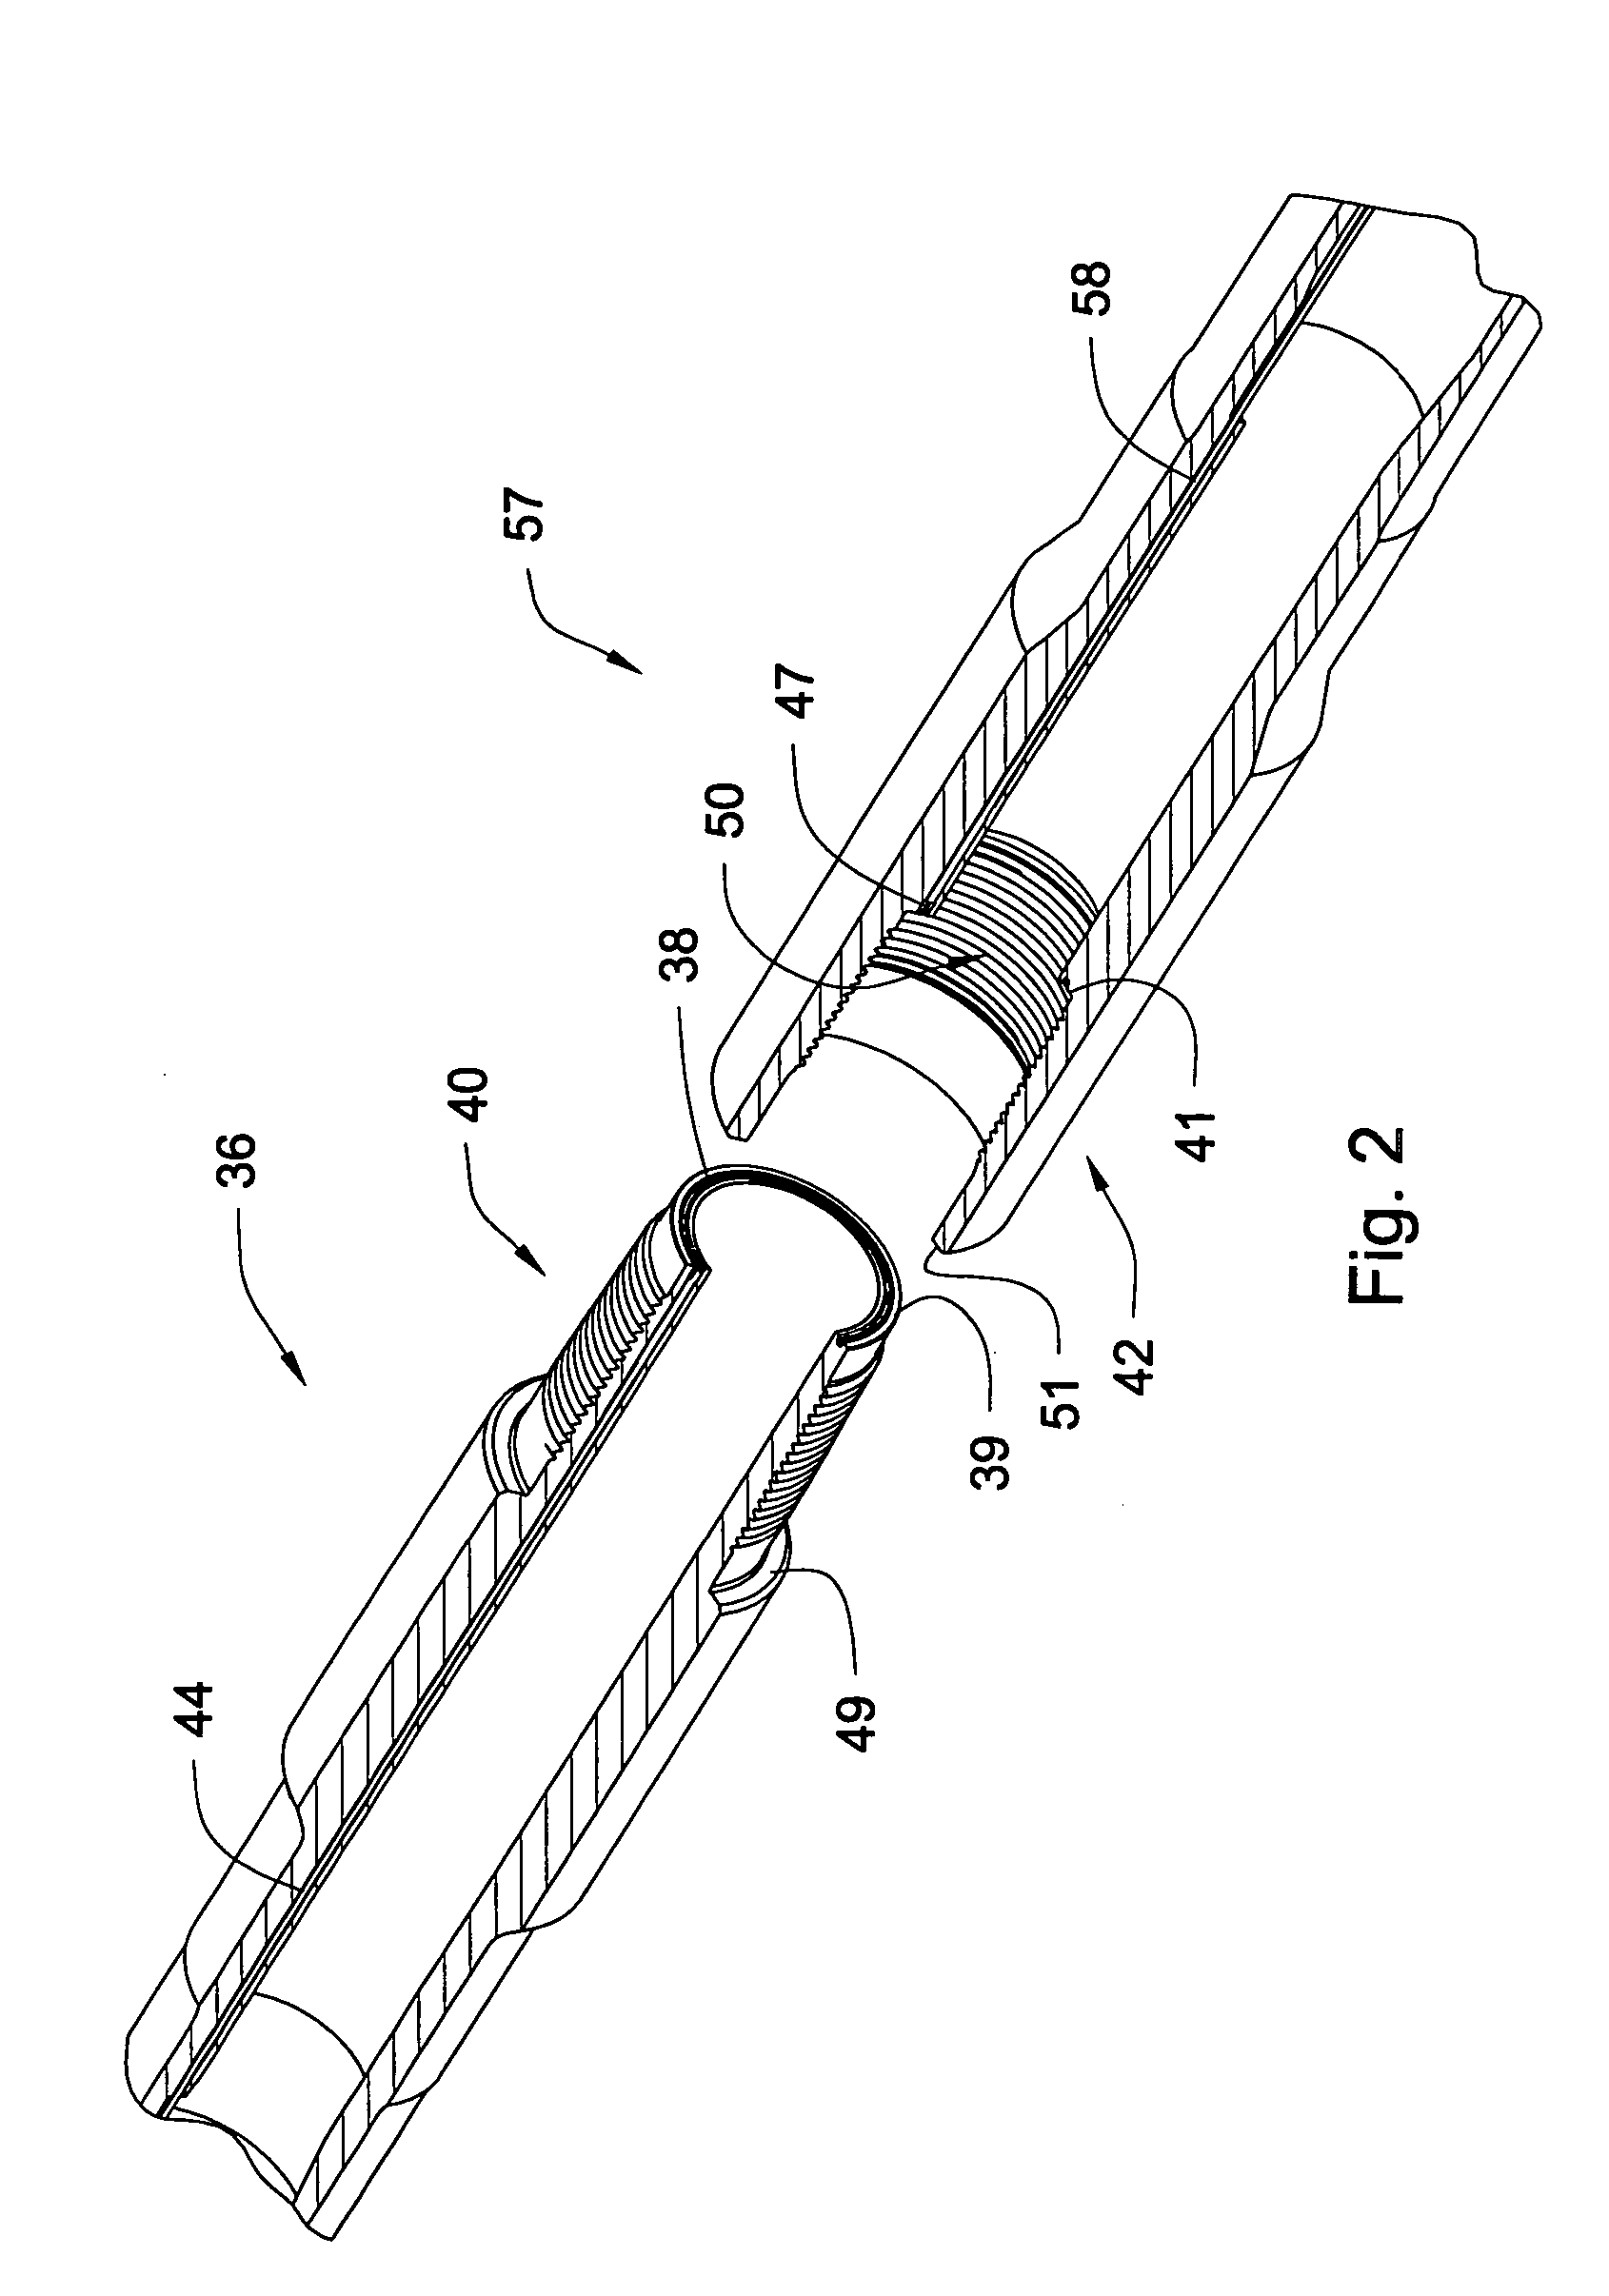 Element of an inductive coupler